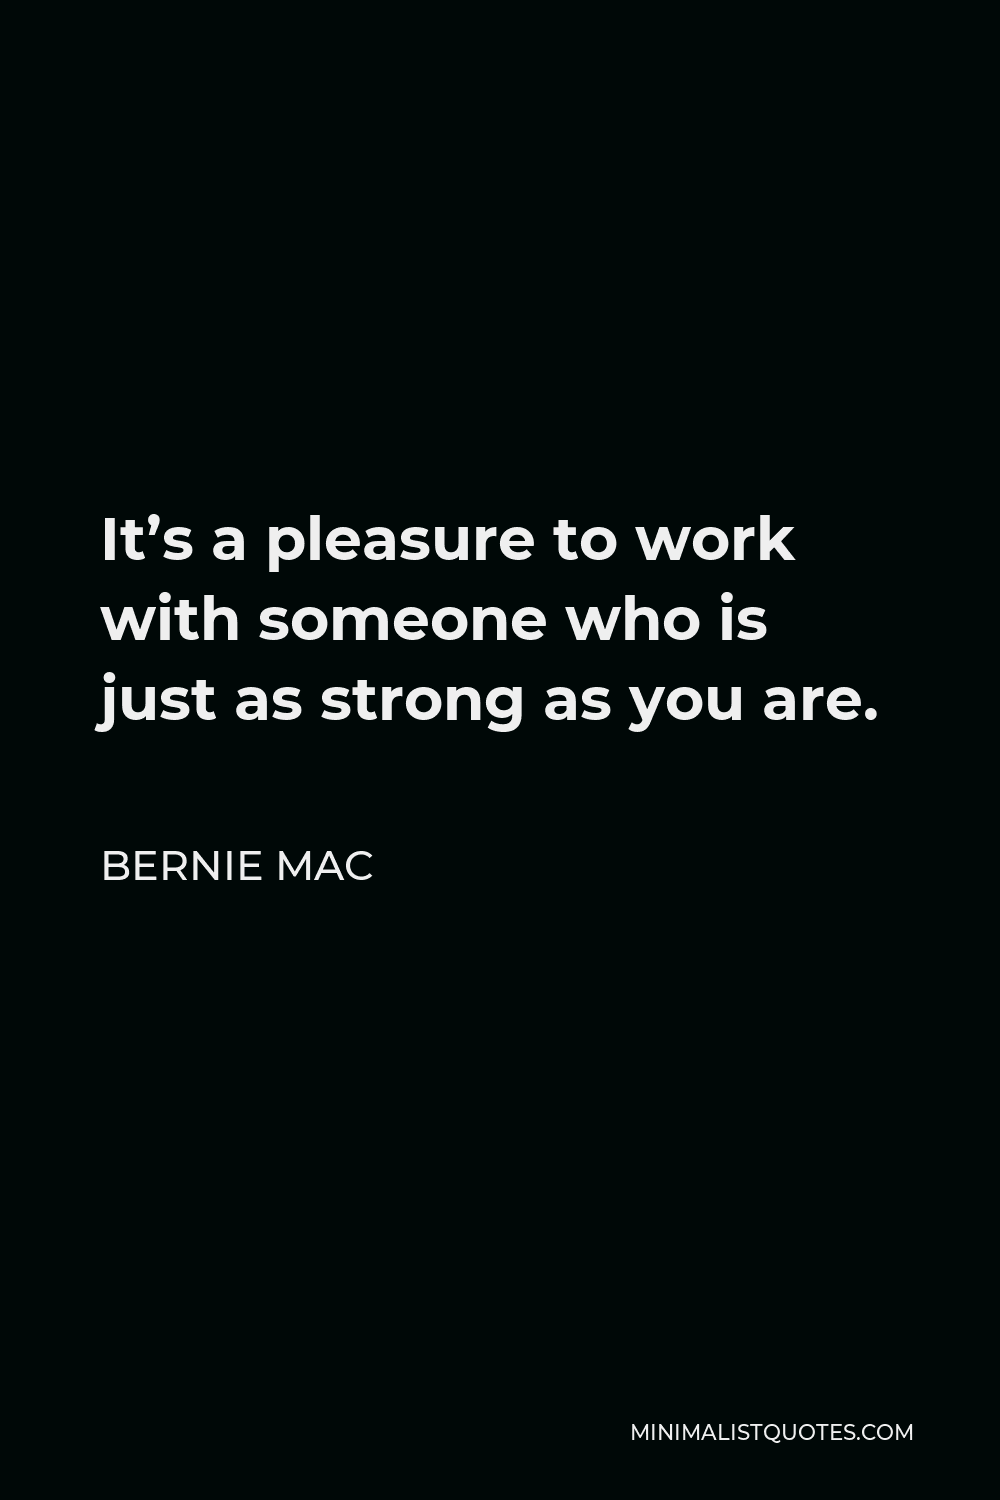 Bernie Mac Quote - It’s a pleasure to work with someone who is just as strong as you are.